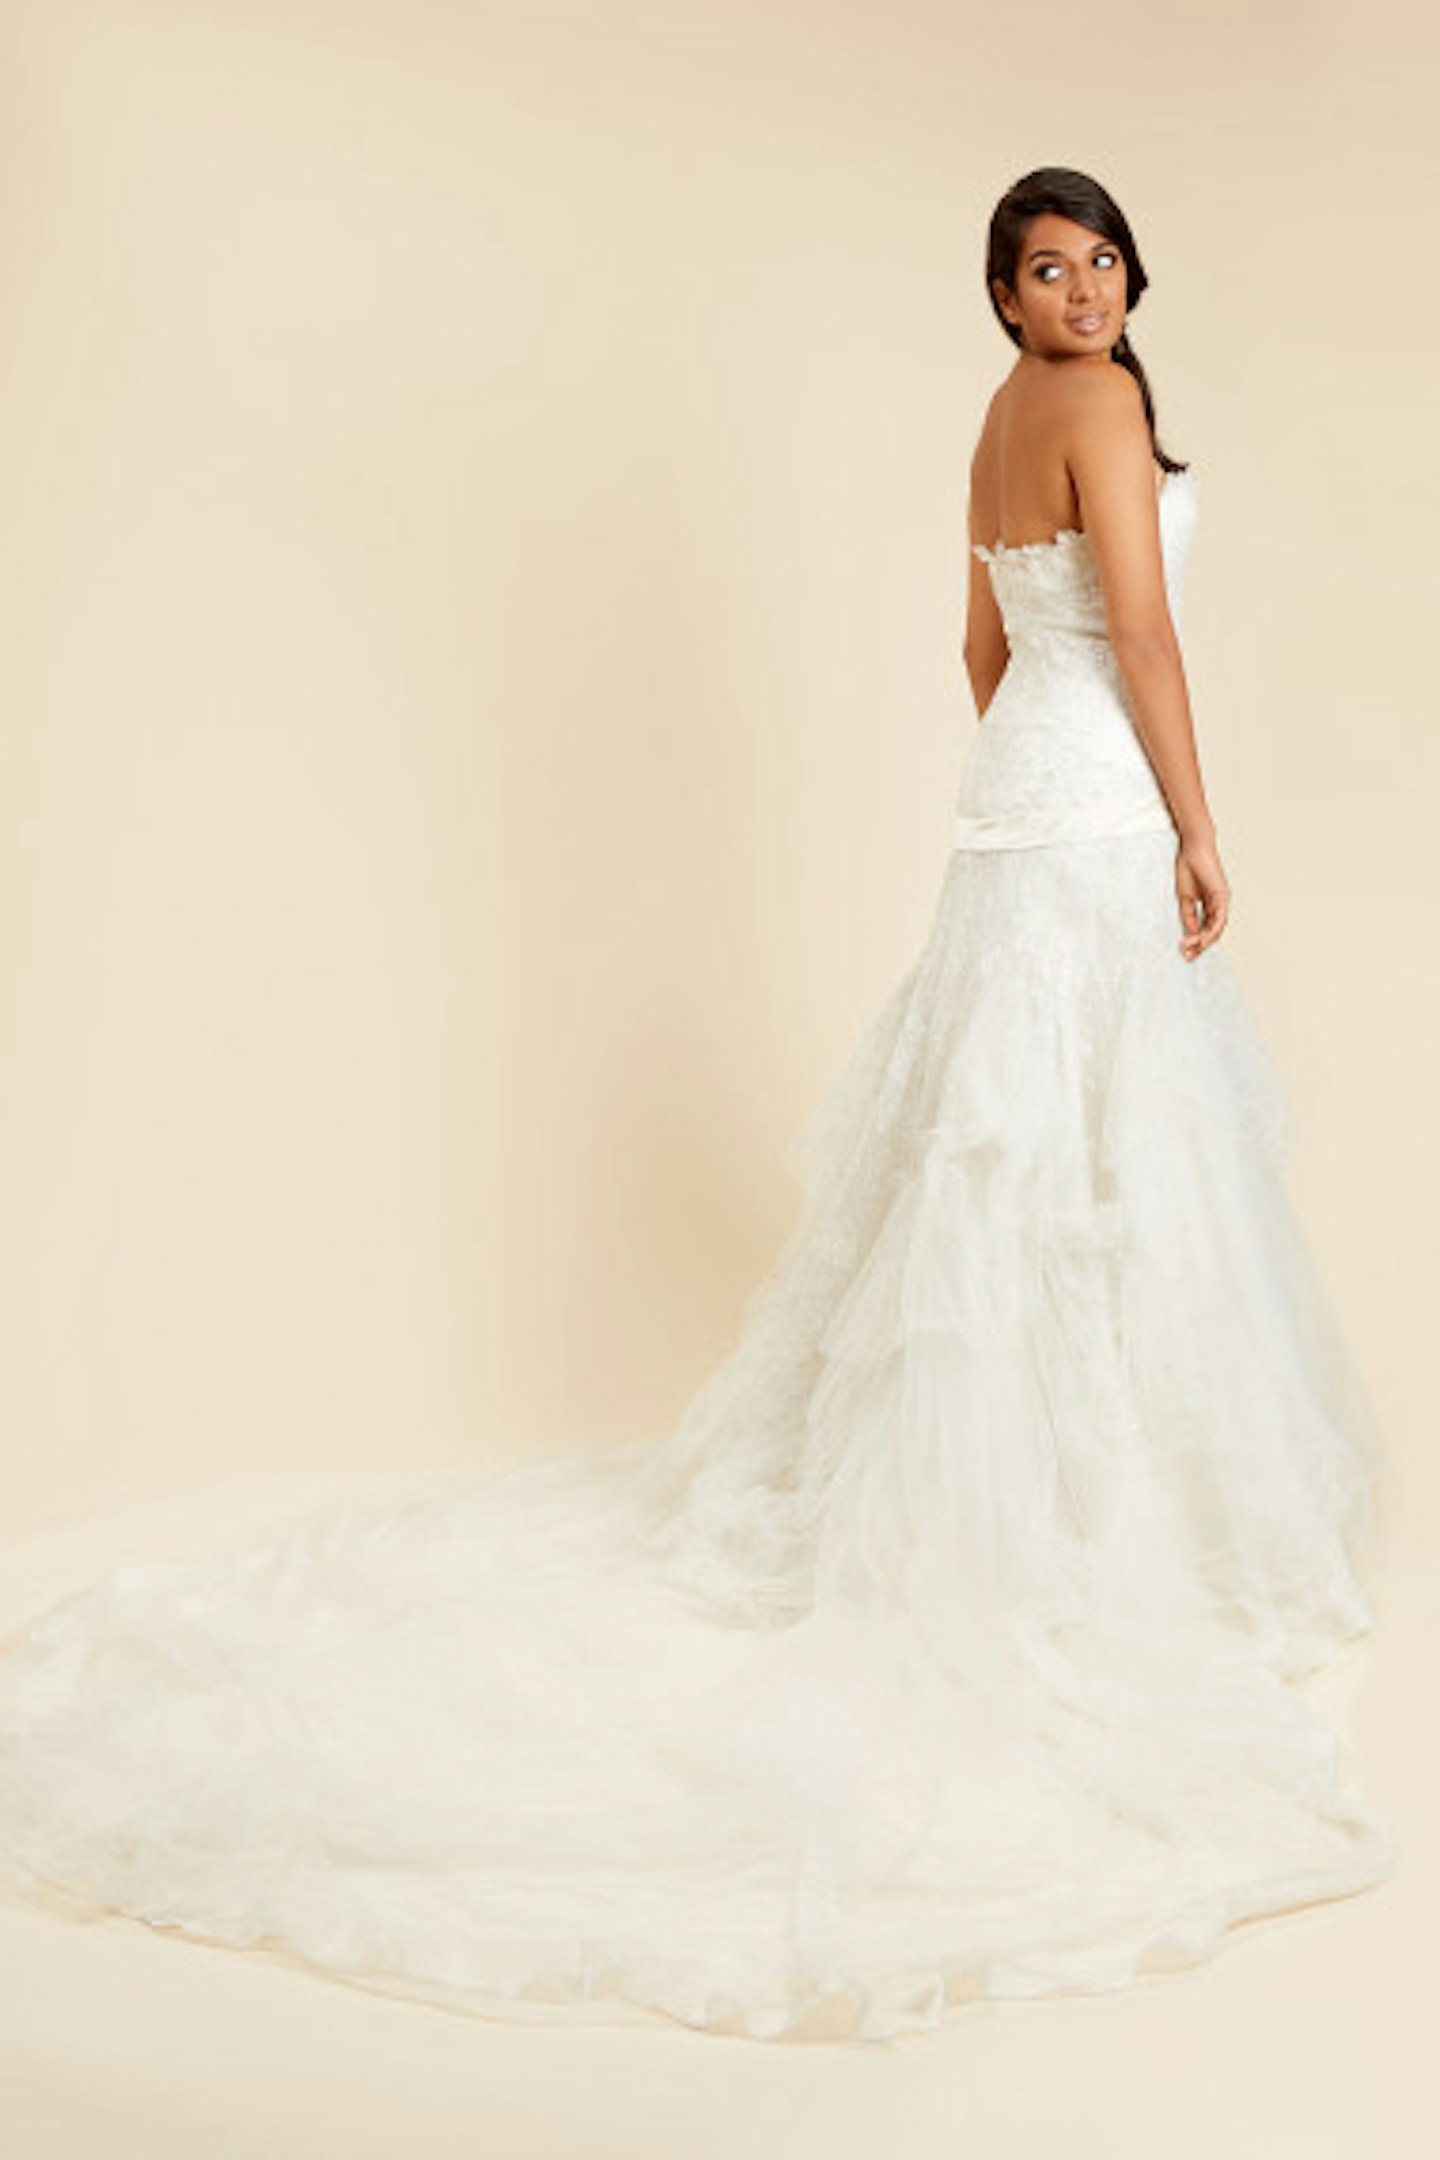 Elie Saab for Pronovias, Hand-Embroidered Lace Gown with Drop-Waist, WAS £5,500, NOW £2,950